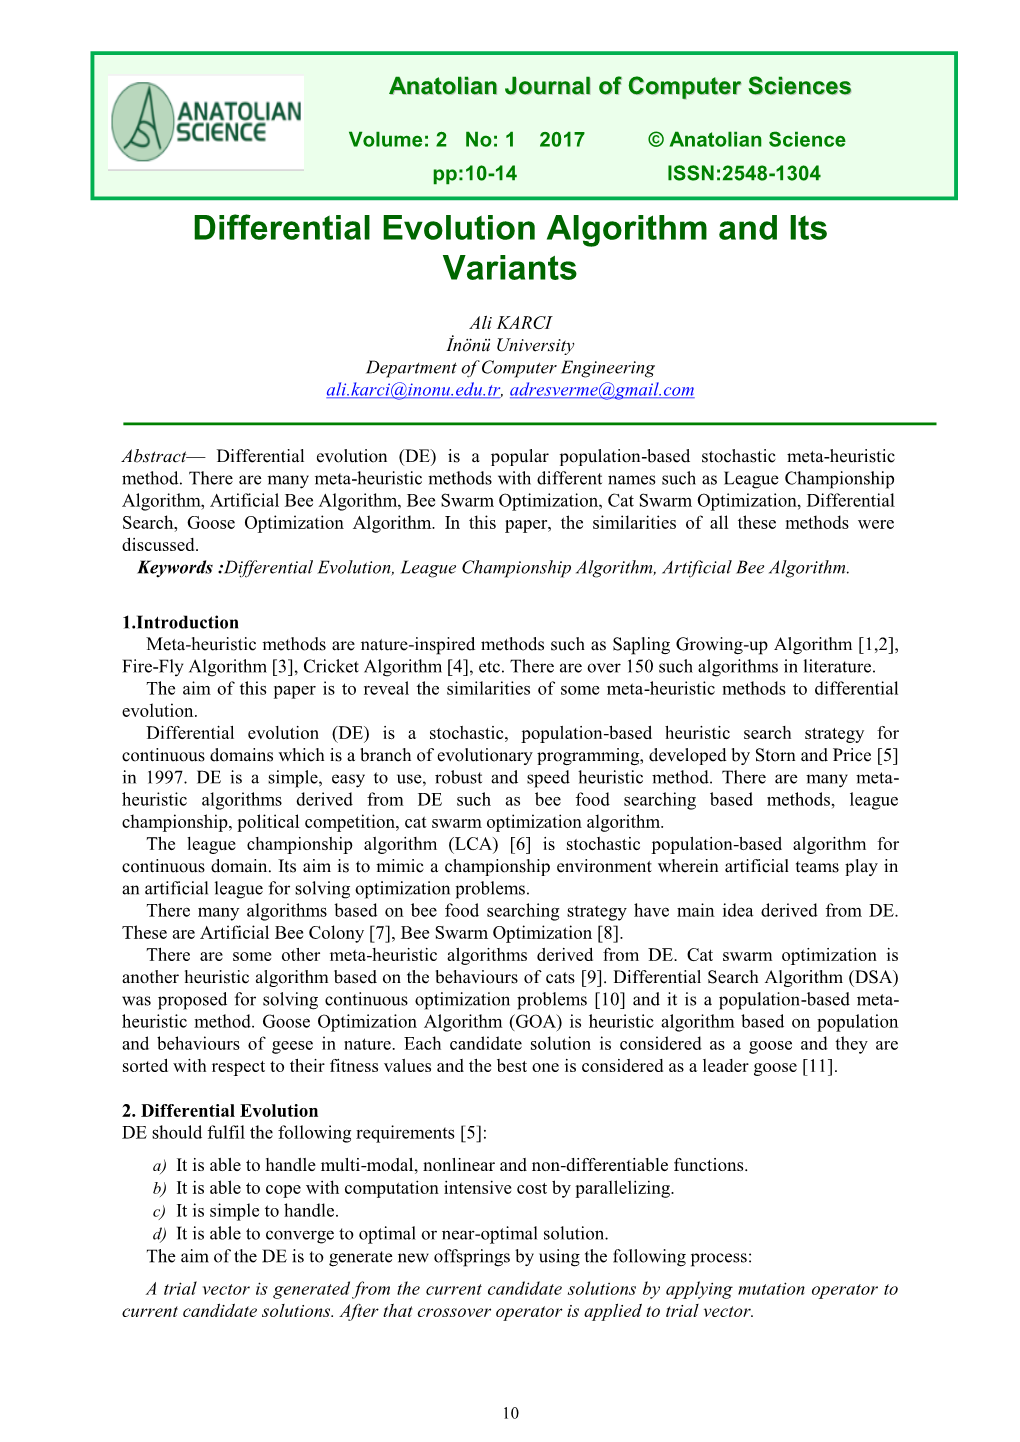 Differential Evolution Algorithm and Its Variants